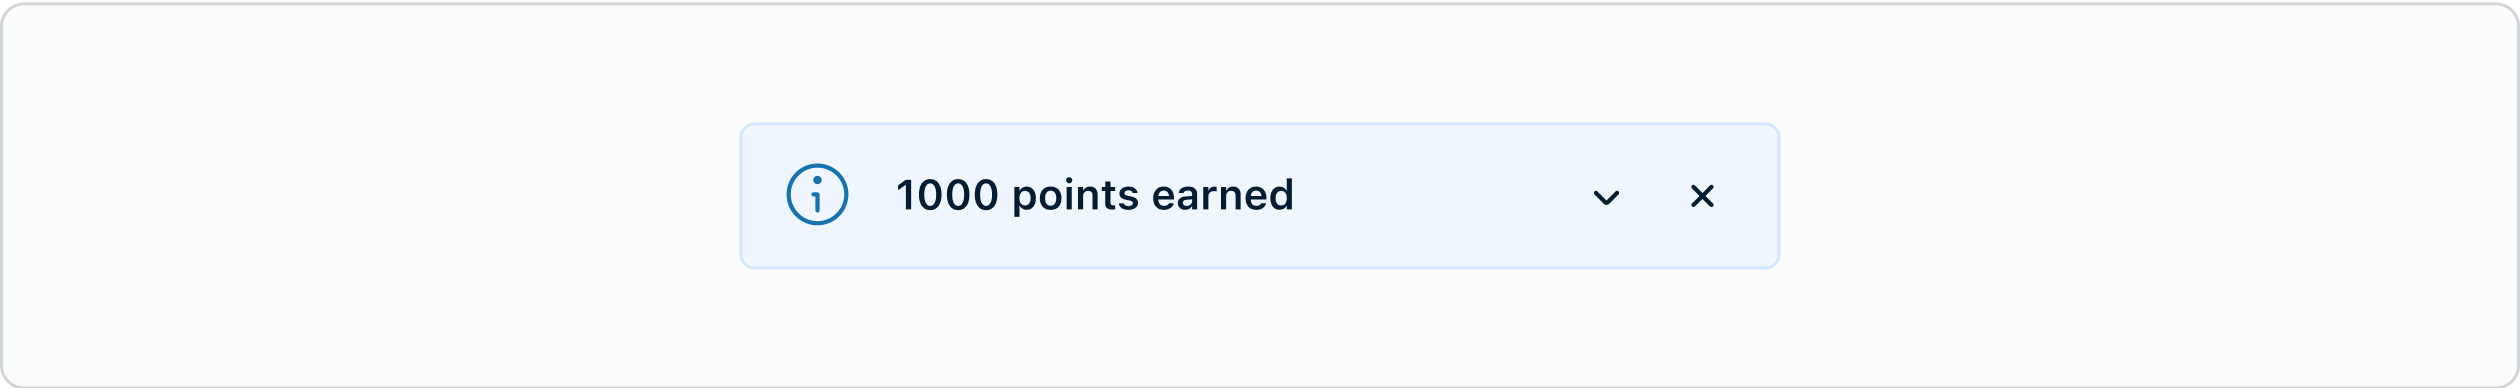 A blue banner in the info status that says "1000 points earned".